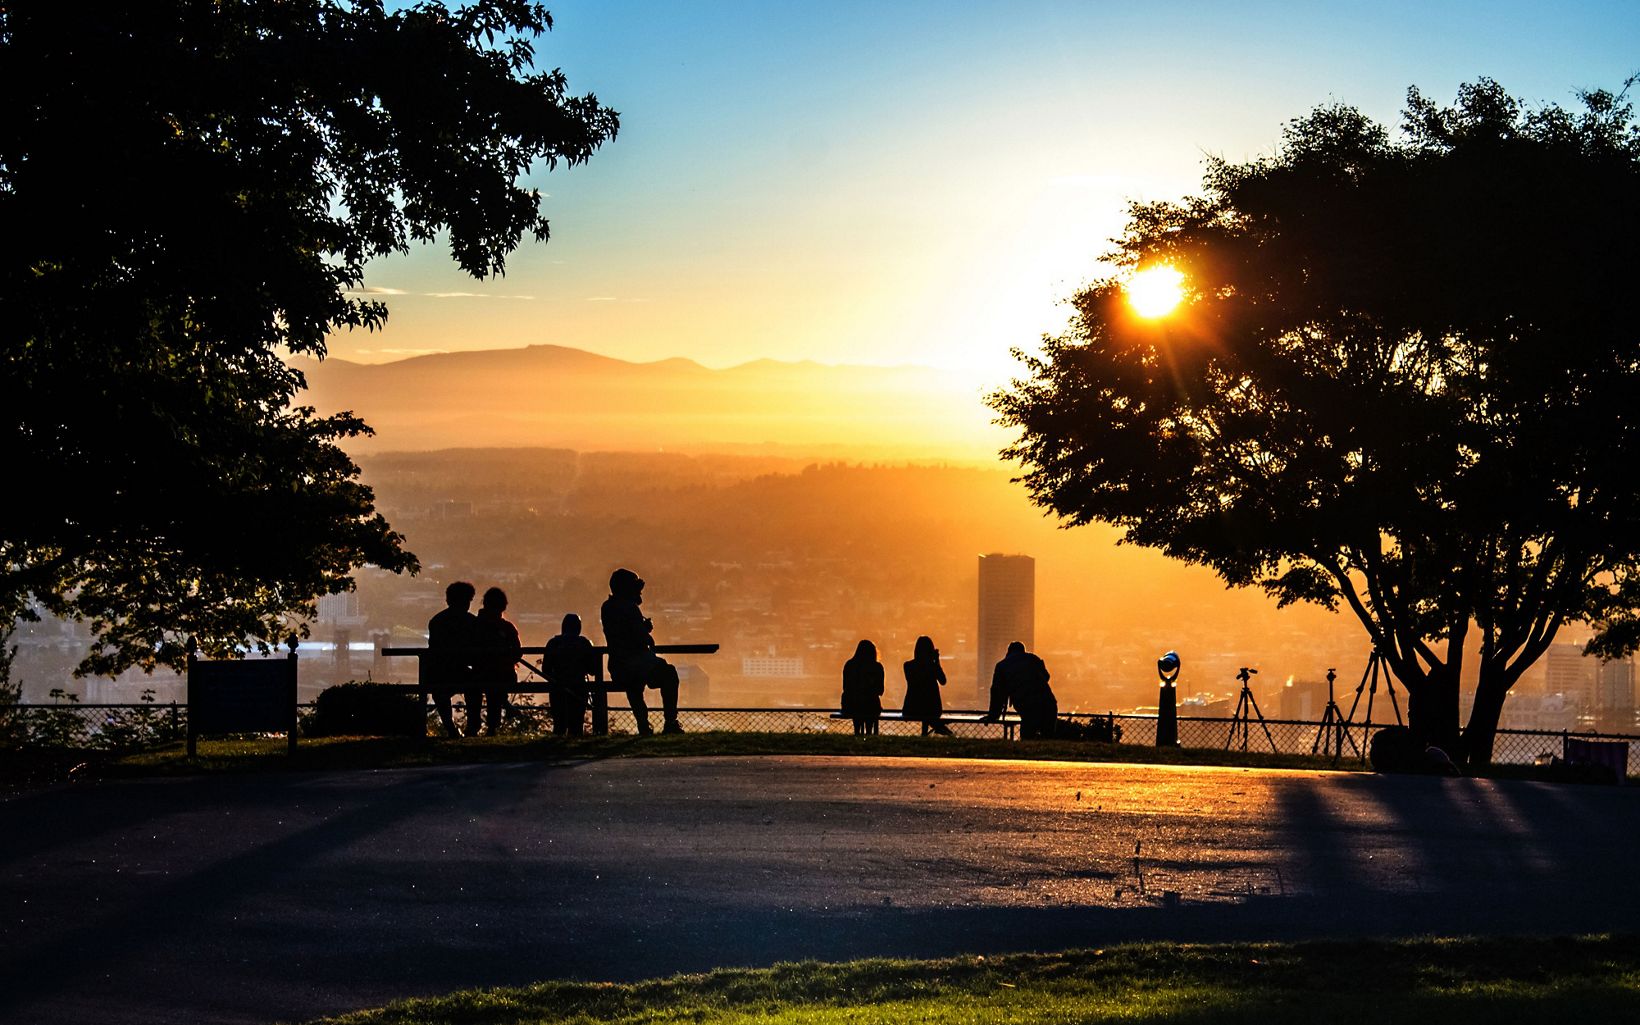 A small group of people sit at the edge of a city park overlooking Portland, Oregon, as the setting sun shines through a nearby tree.